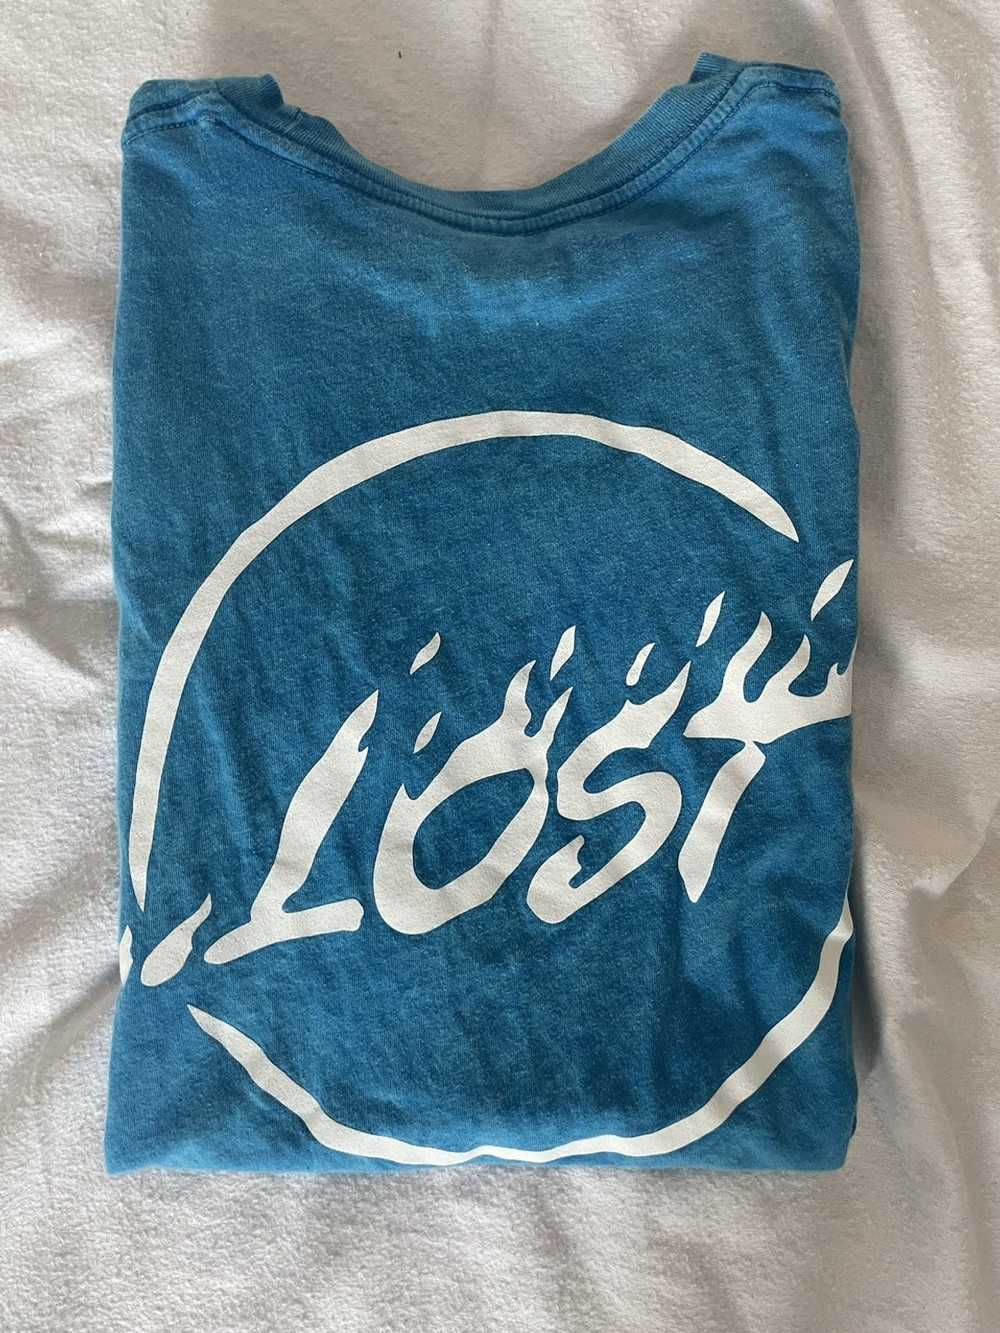 Lost LOST T-Shirt - image 3